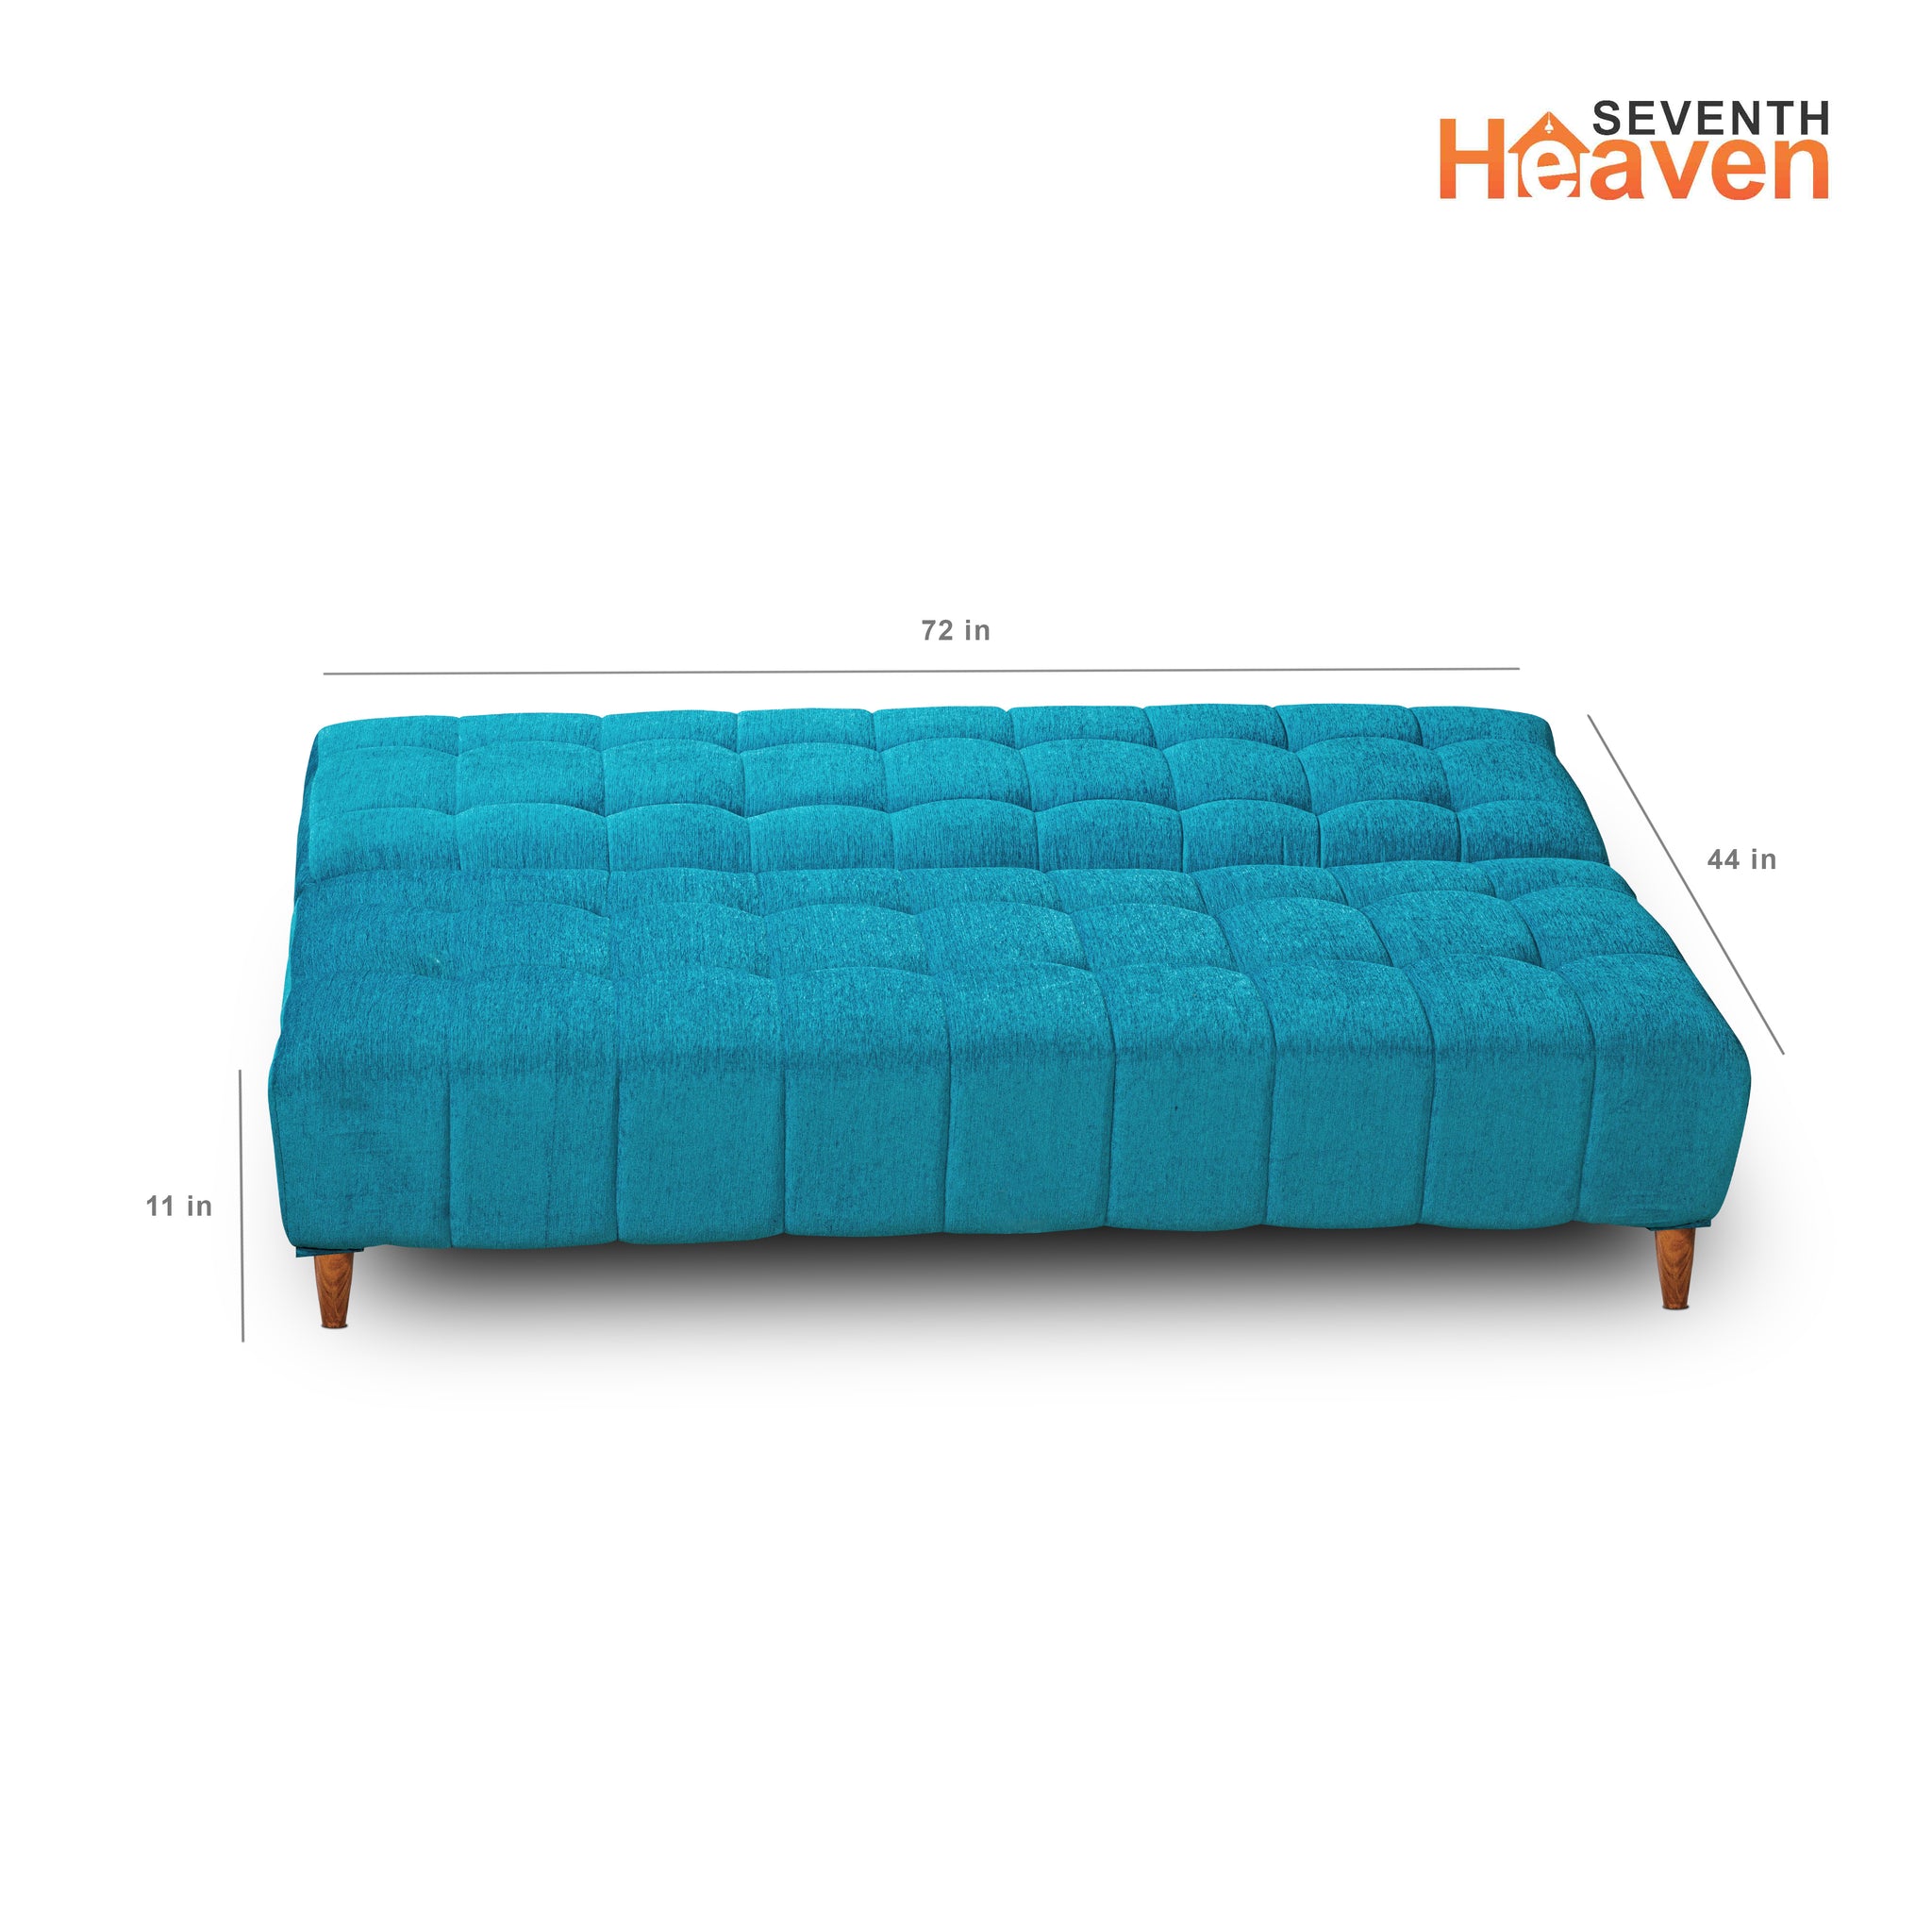 Seventh Heaven Lisbon 4 Seater Wooden Sofa Cum Bed with Armrest. Modern & Elegant Smart Furniture Range for luxurious homes, living rooms and offices. Use as a sofa, lounger or bed with removable armrest. Perfect for guests. Molphino fabric with sheesham polished wooden legs. Sky Blue colour.